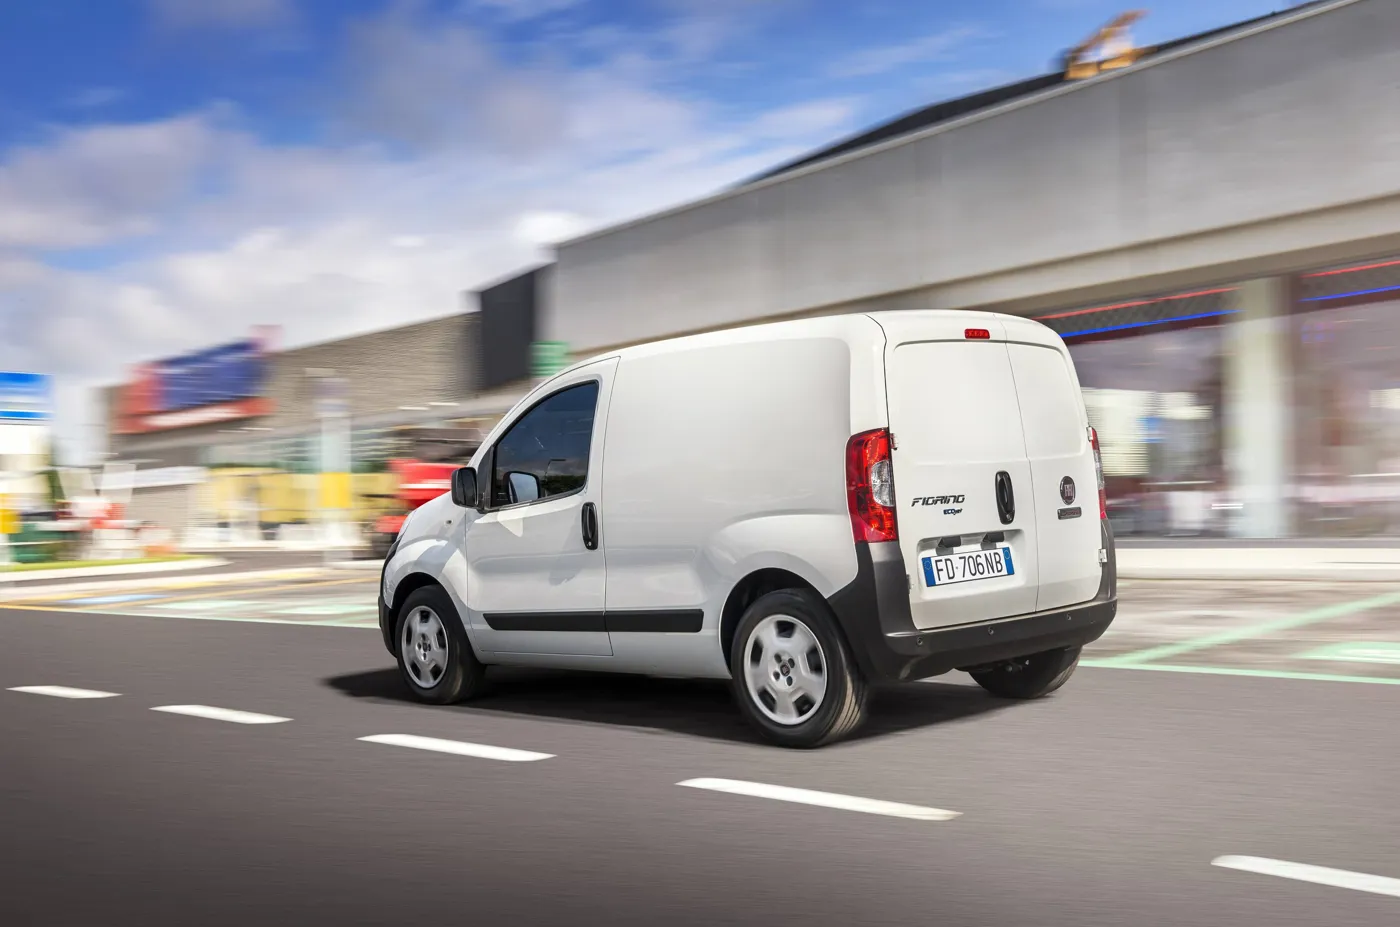 Fiat Professional announces prices and specifications for new Fiorino